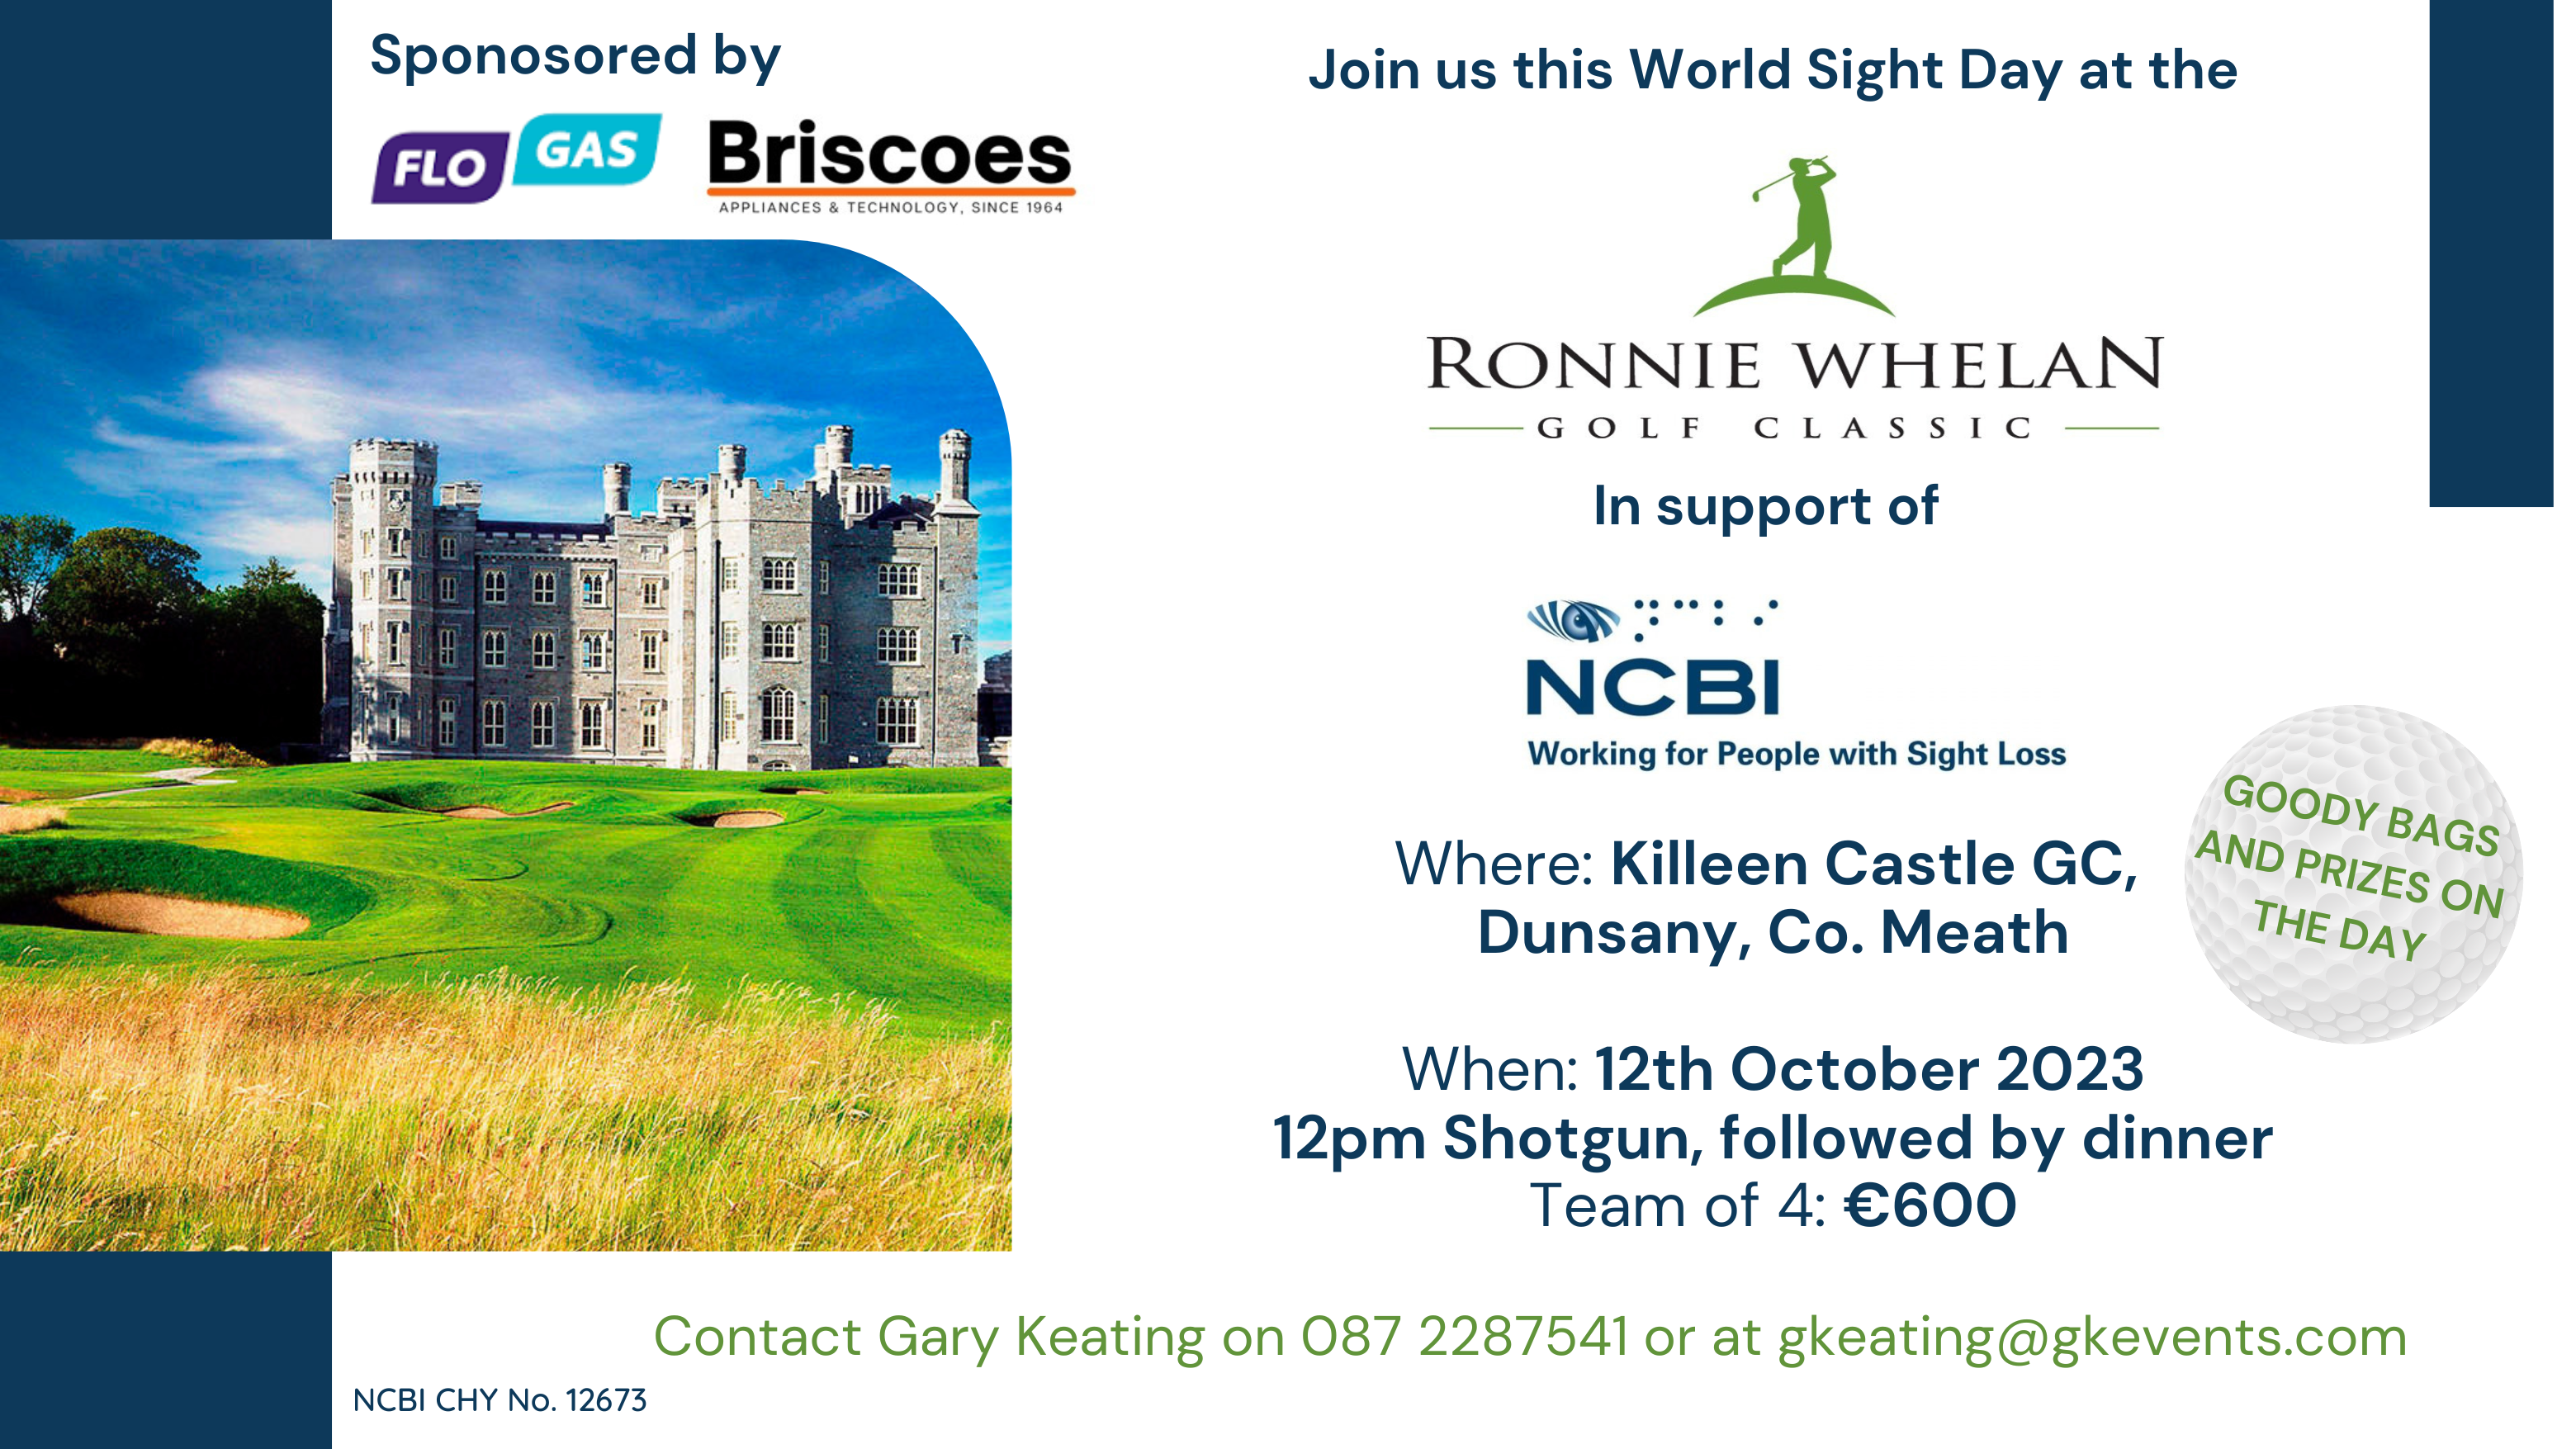 The left of this poster for the event shows a picture of the grounds of Kileen Castle. To the right is a white space with text which explains the details of the event. The details are available in the event description.